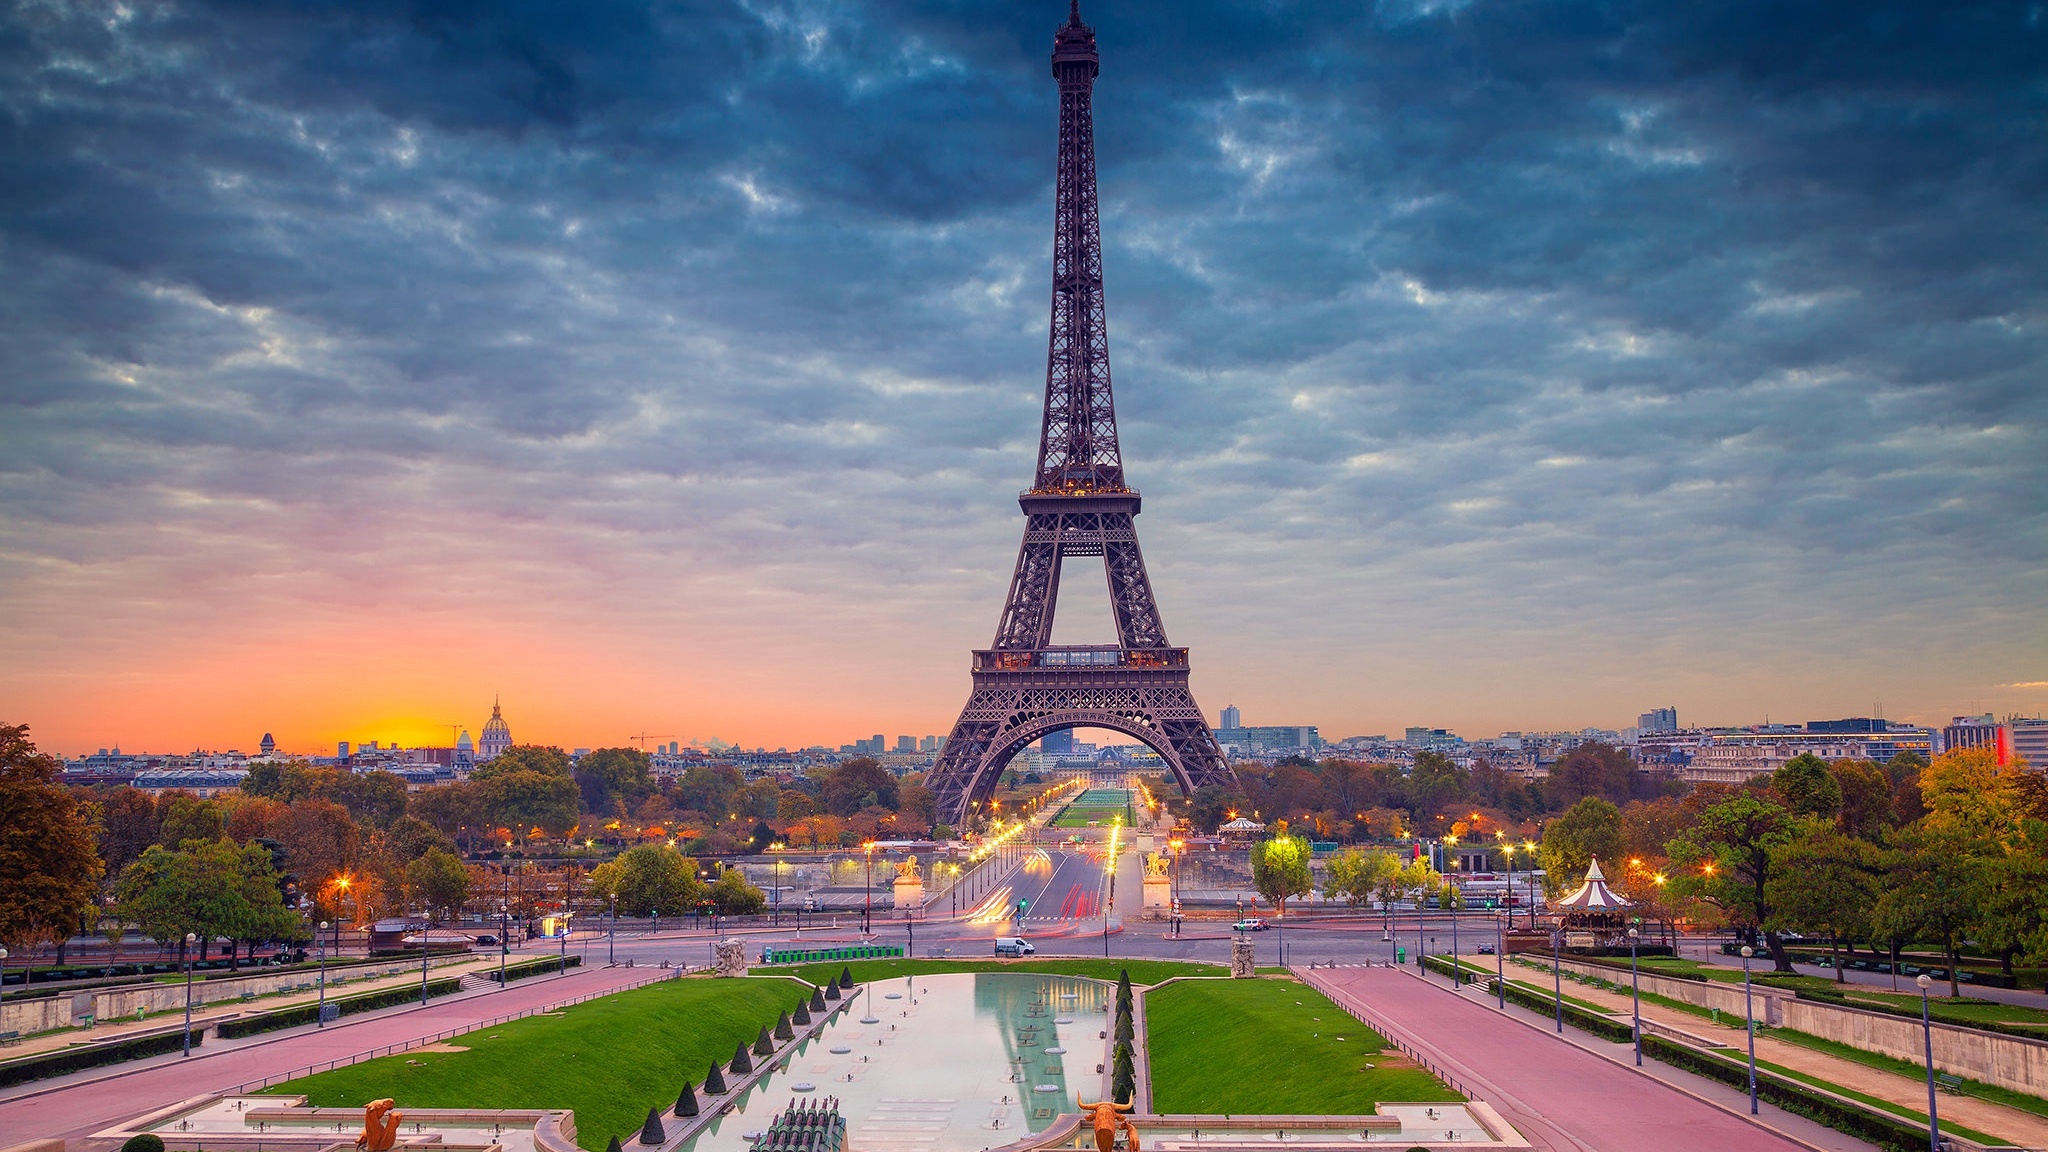 2048x1152 Eiffel Tower Paris Beautiful View 2048x1152 Resolution HD 4k Wallpapers, Images ...